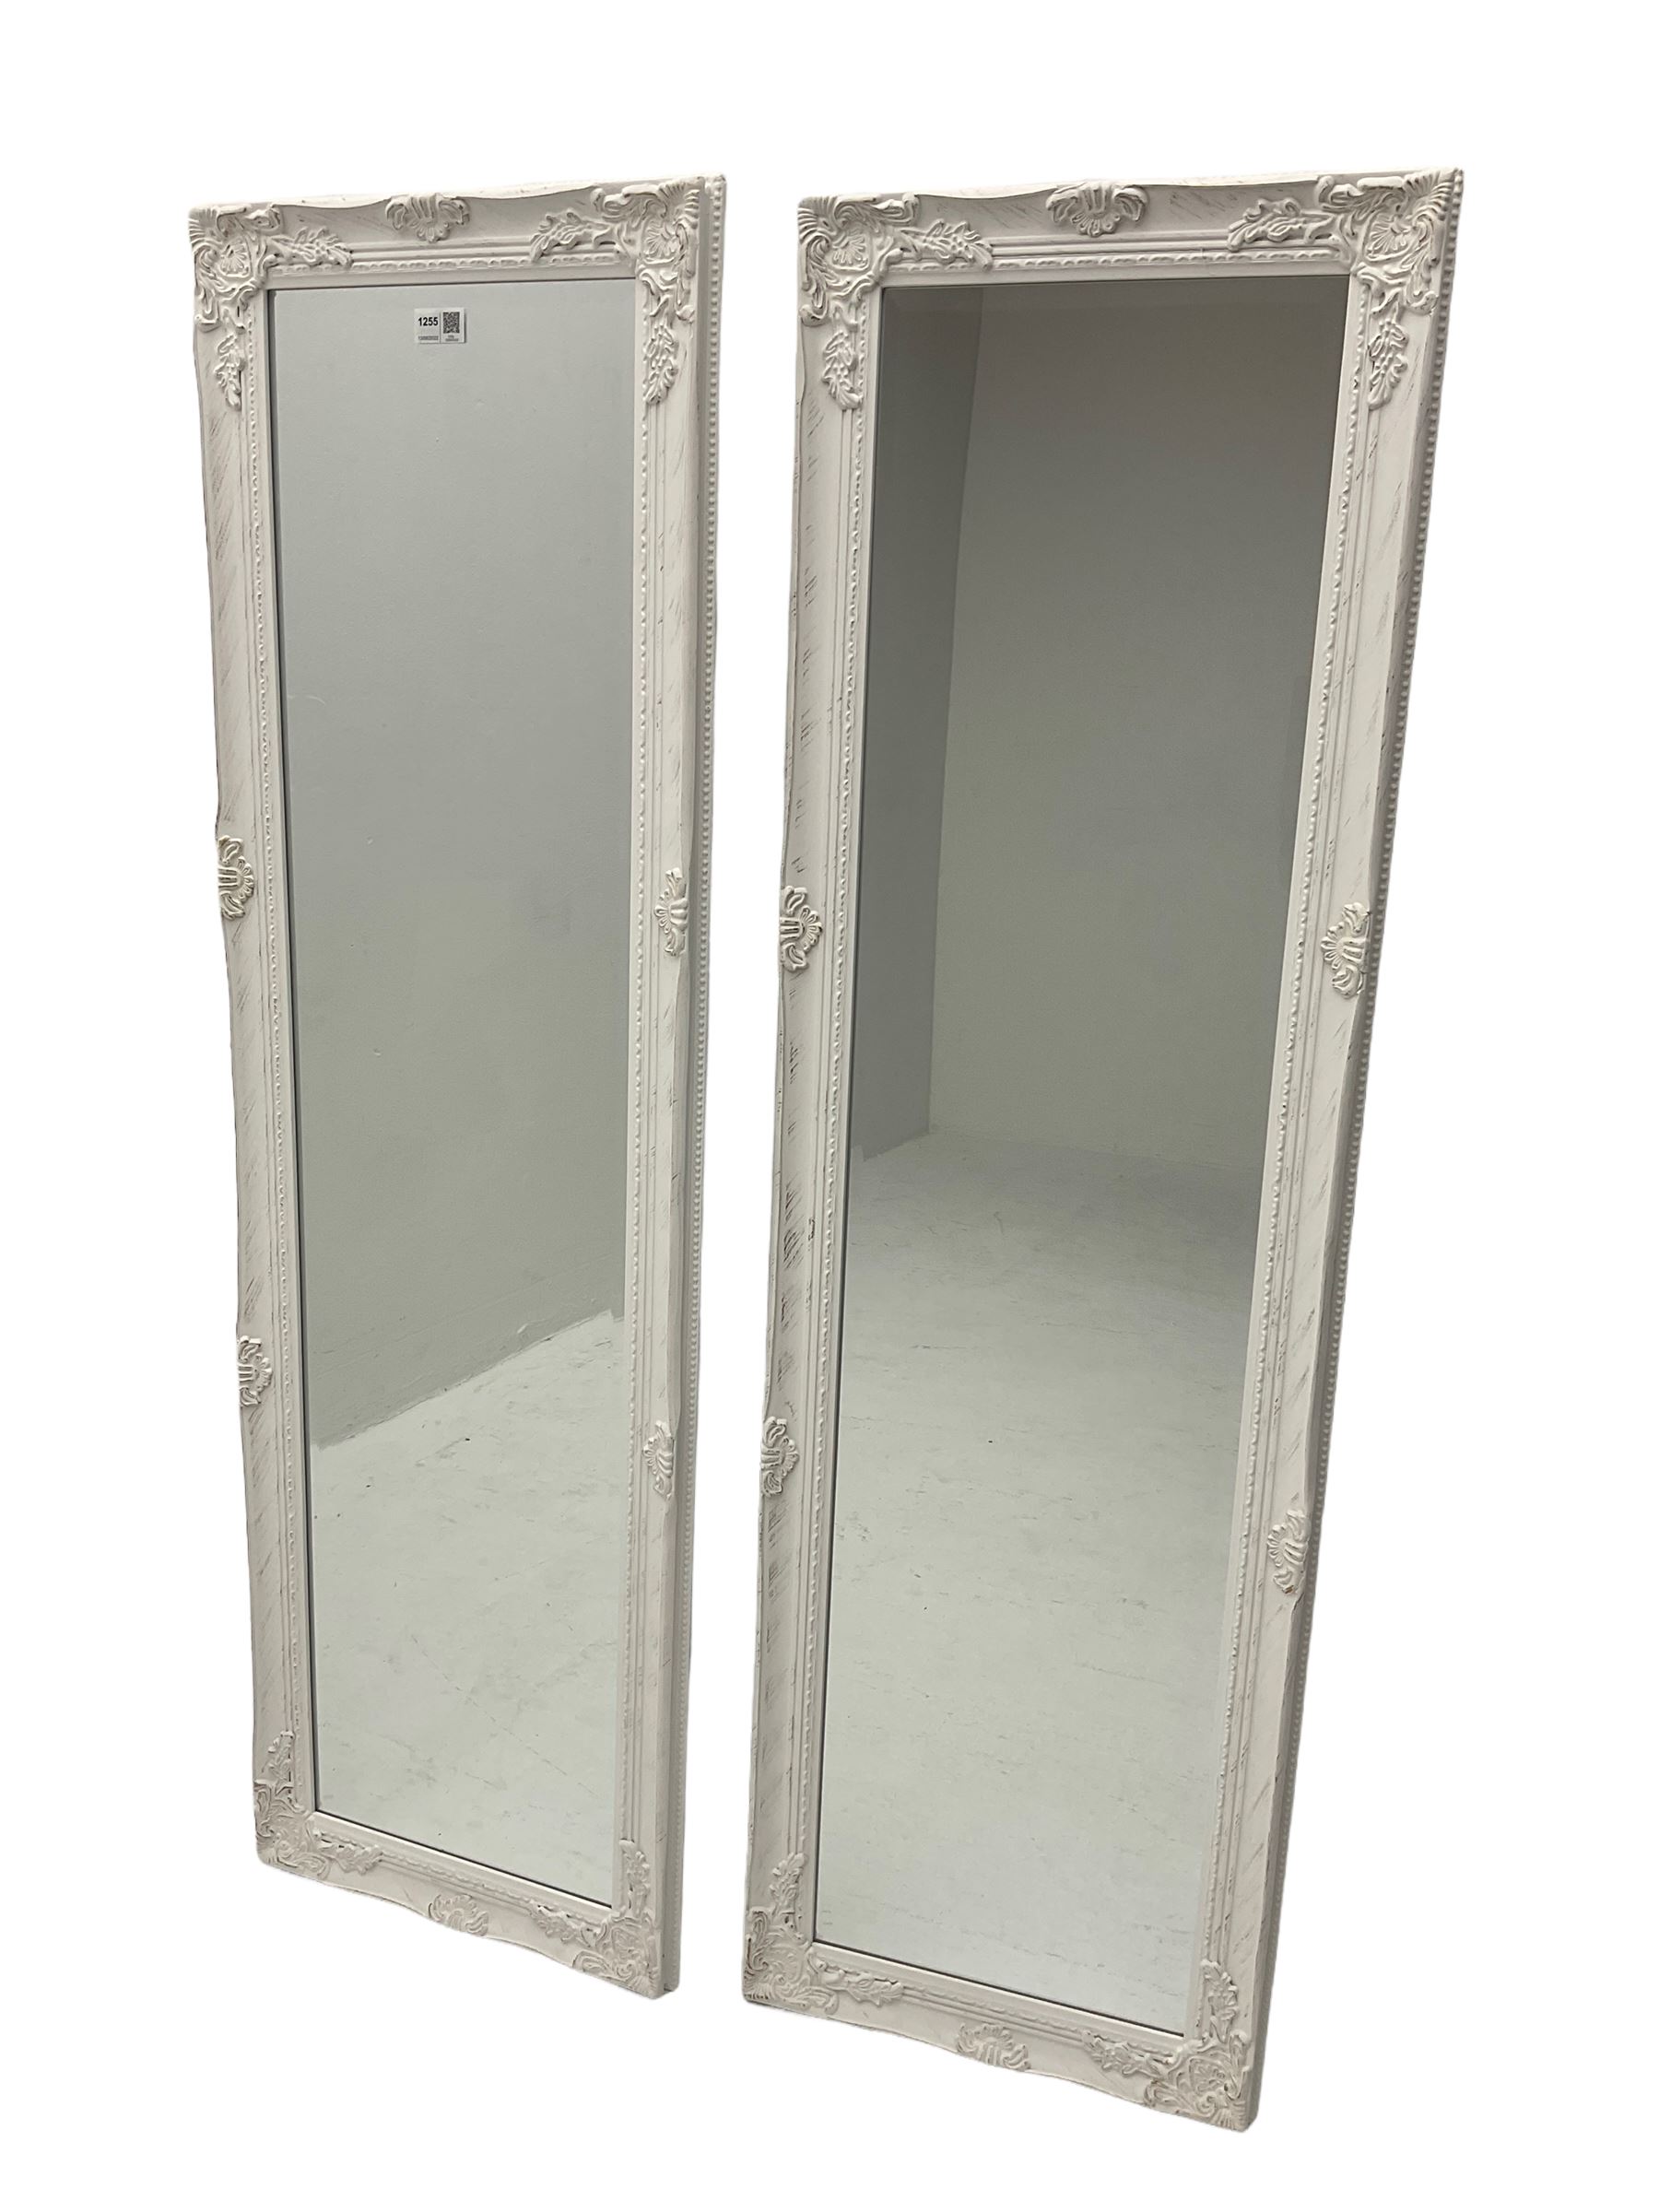 Pair of classical white painted rectangular wall mirror